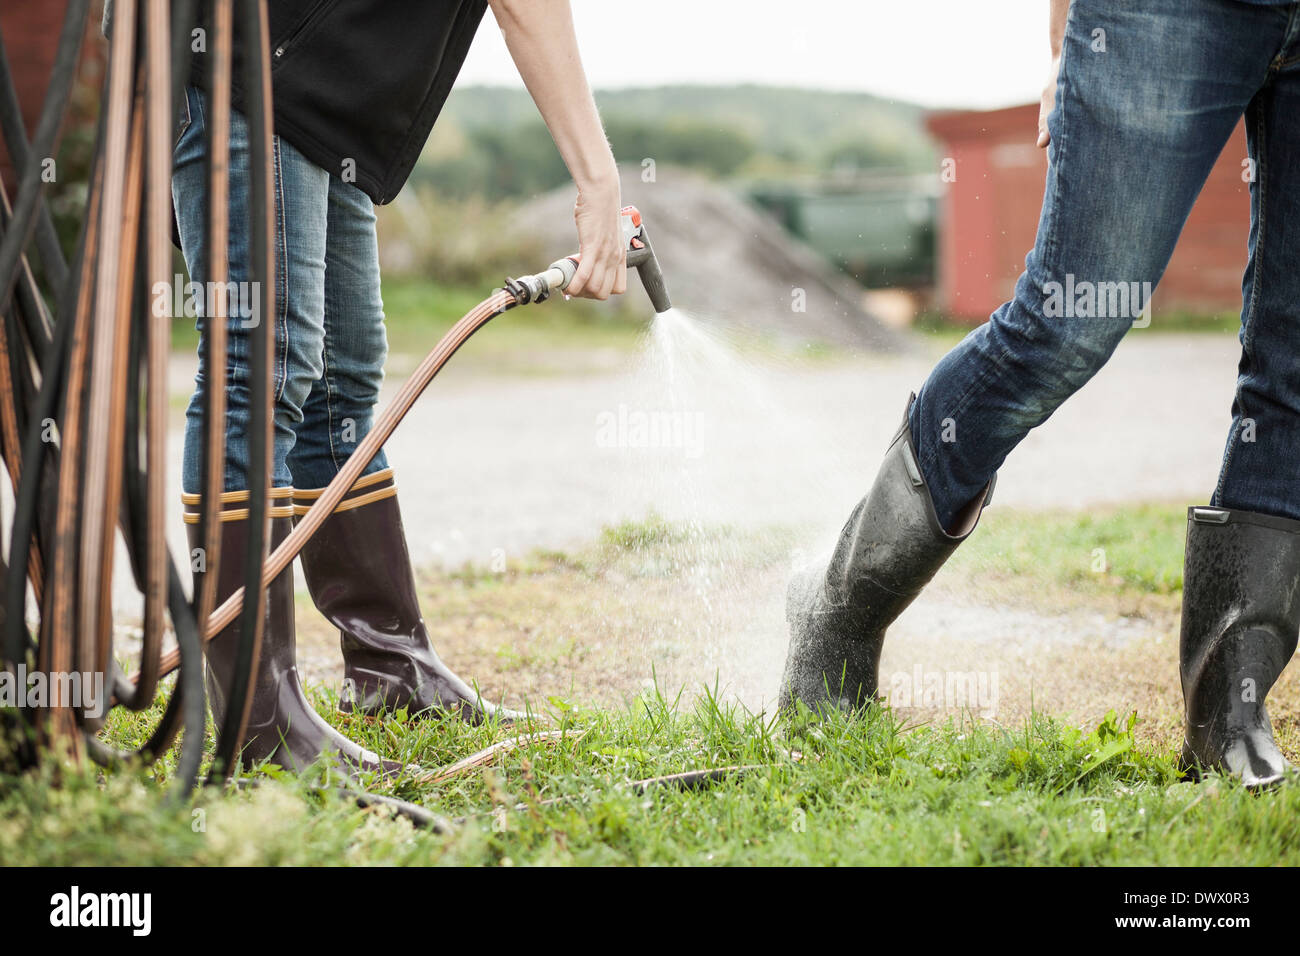 Low section of woman spraying water from hose on man's leg on farm Stock Photo